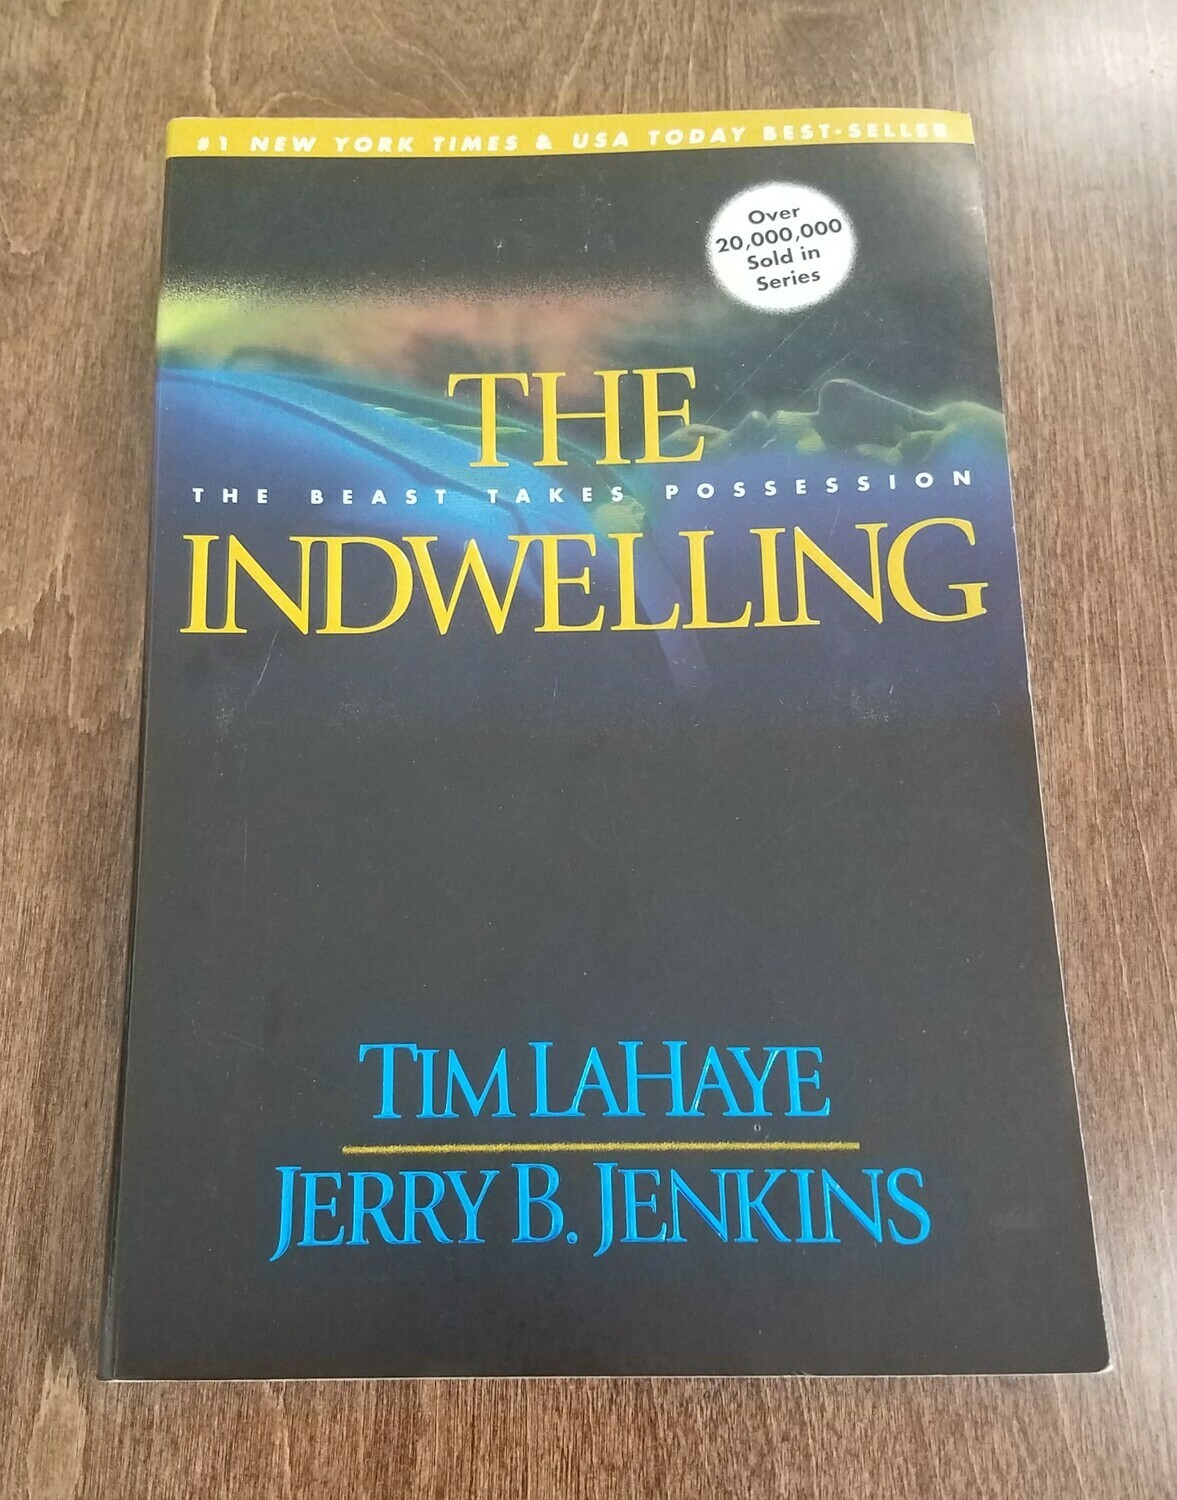 The Indwelling: The Beast Takes Possession by Tim LaHaye and Jerry B. Jenkins - Paperback